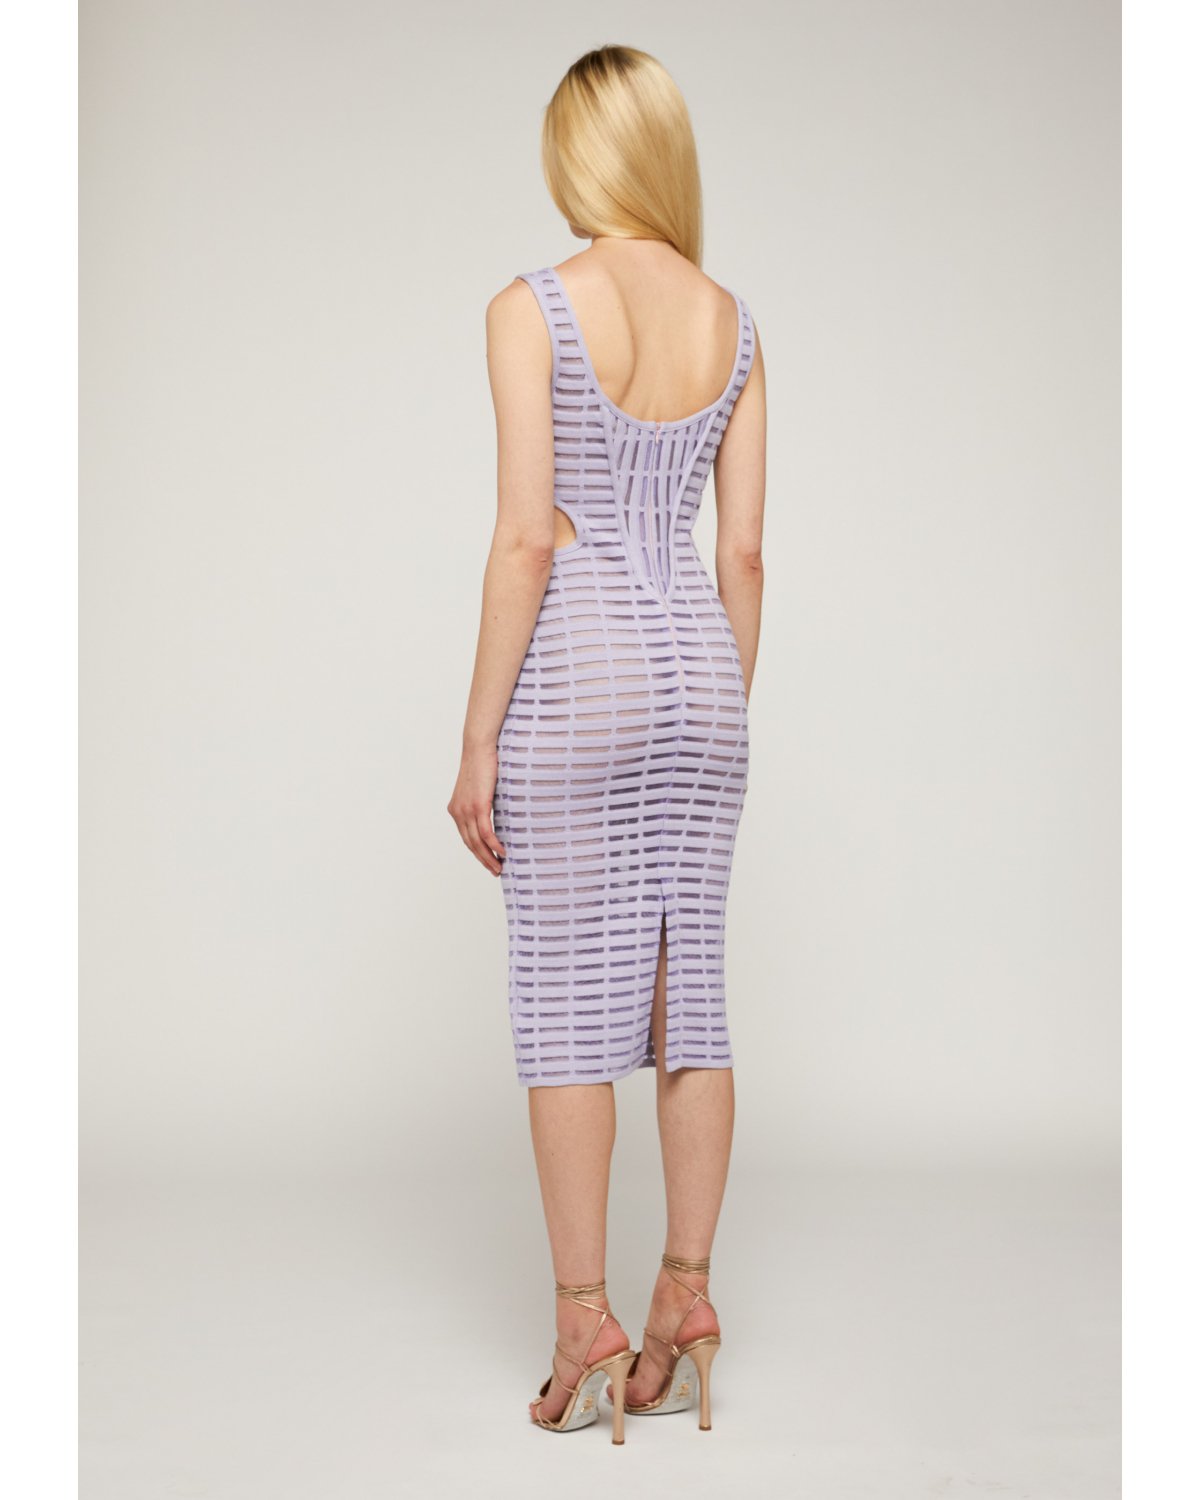 Iconic dress with cut-out | Spring Summer 2023 Collection, 73_74, Cruise 2023 Collection, Warm weather wear, International women's day, Ready to Wear, Iconic Capsule Collection, Spring days | Genny